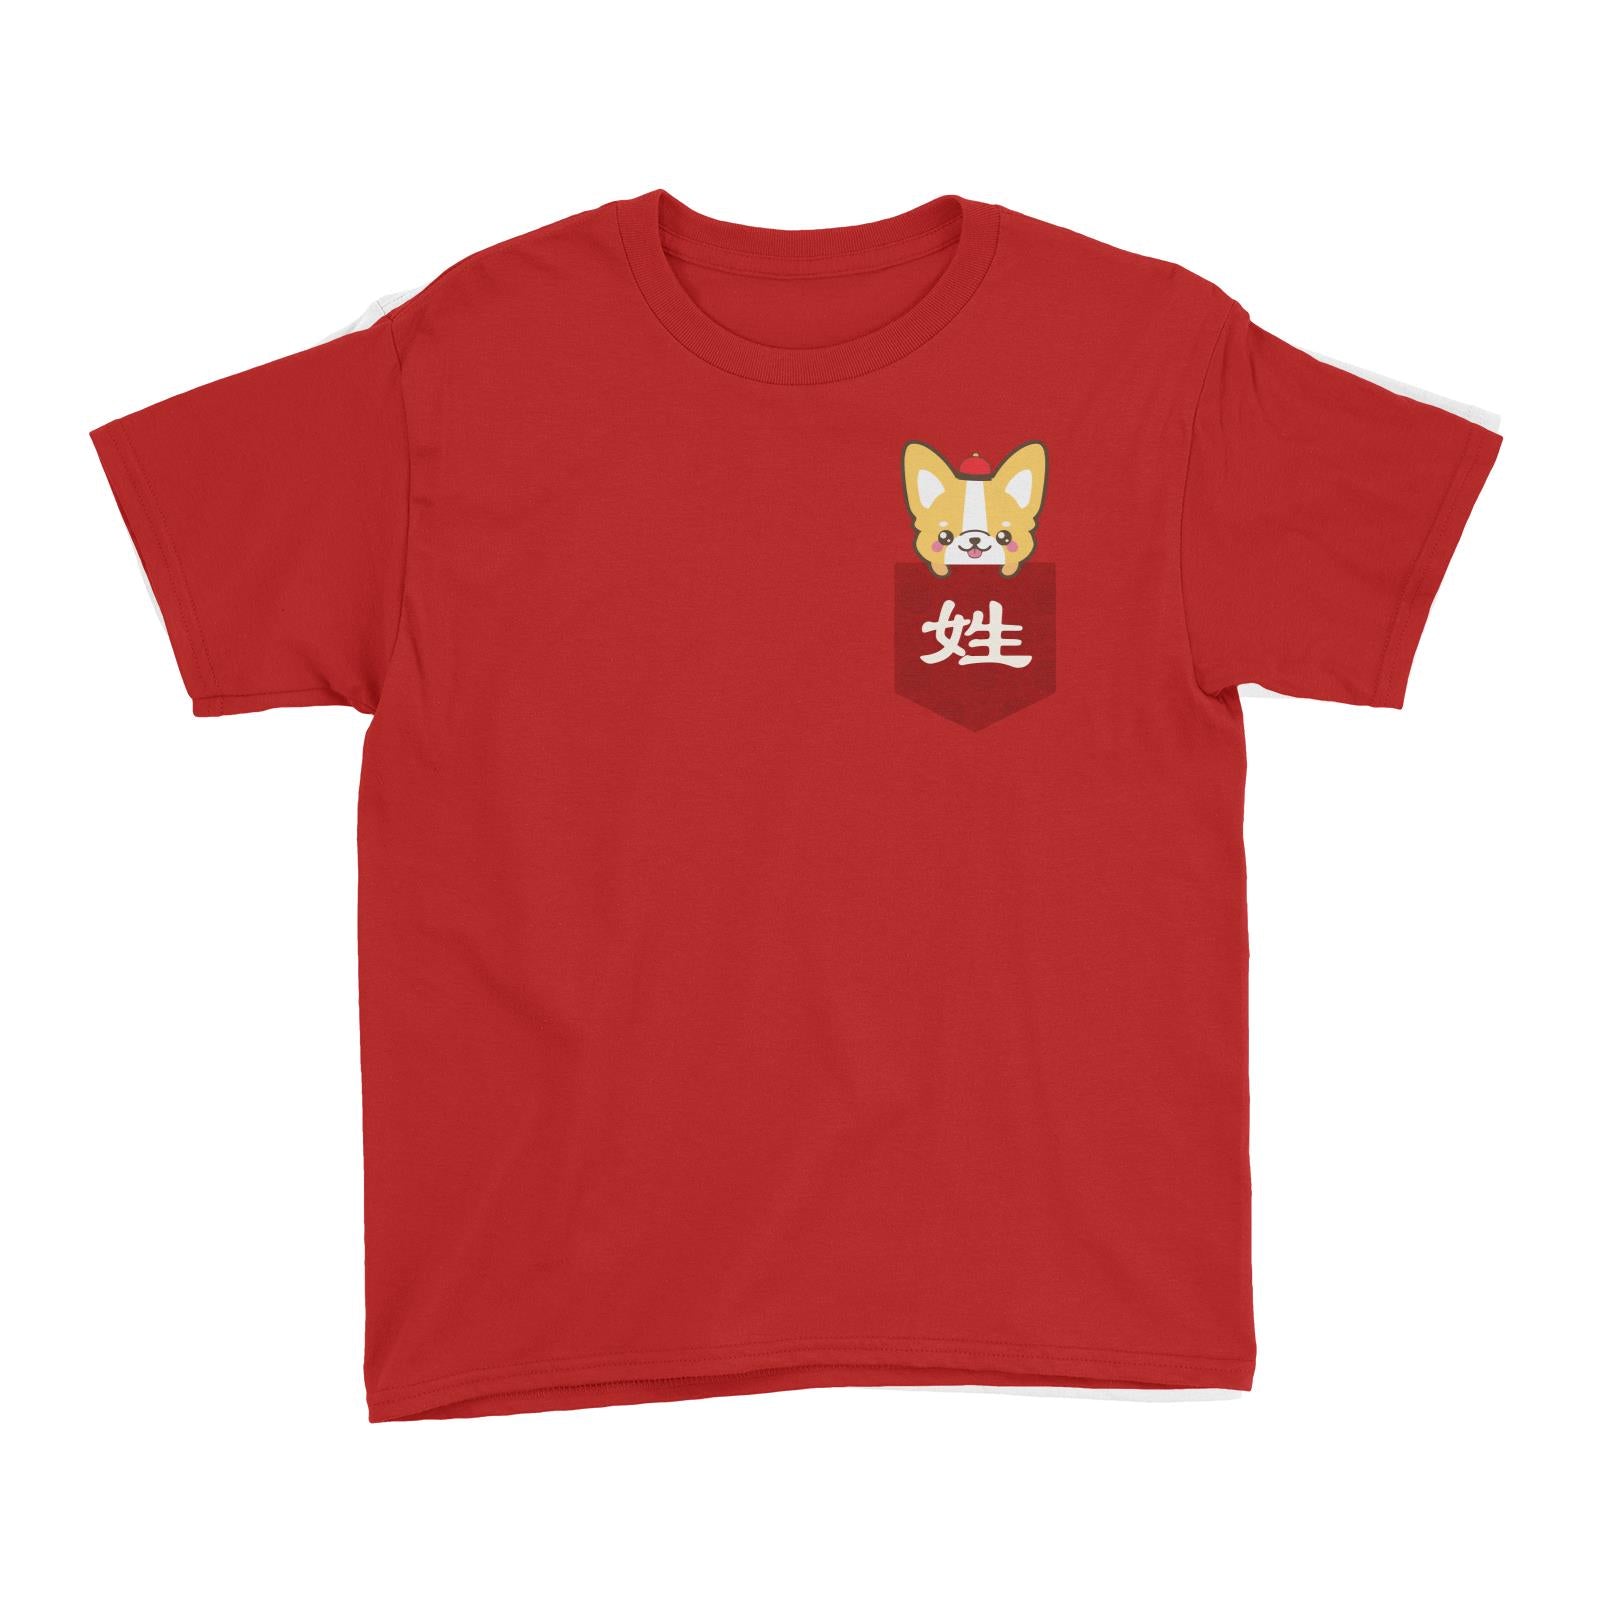 Chinese New Year Pocket Cute Dog 2 Chinese Surname Pocket Kid's T-Shirt  Personalizable Chinese Surname